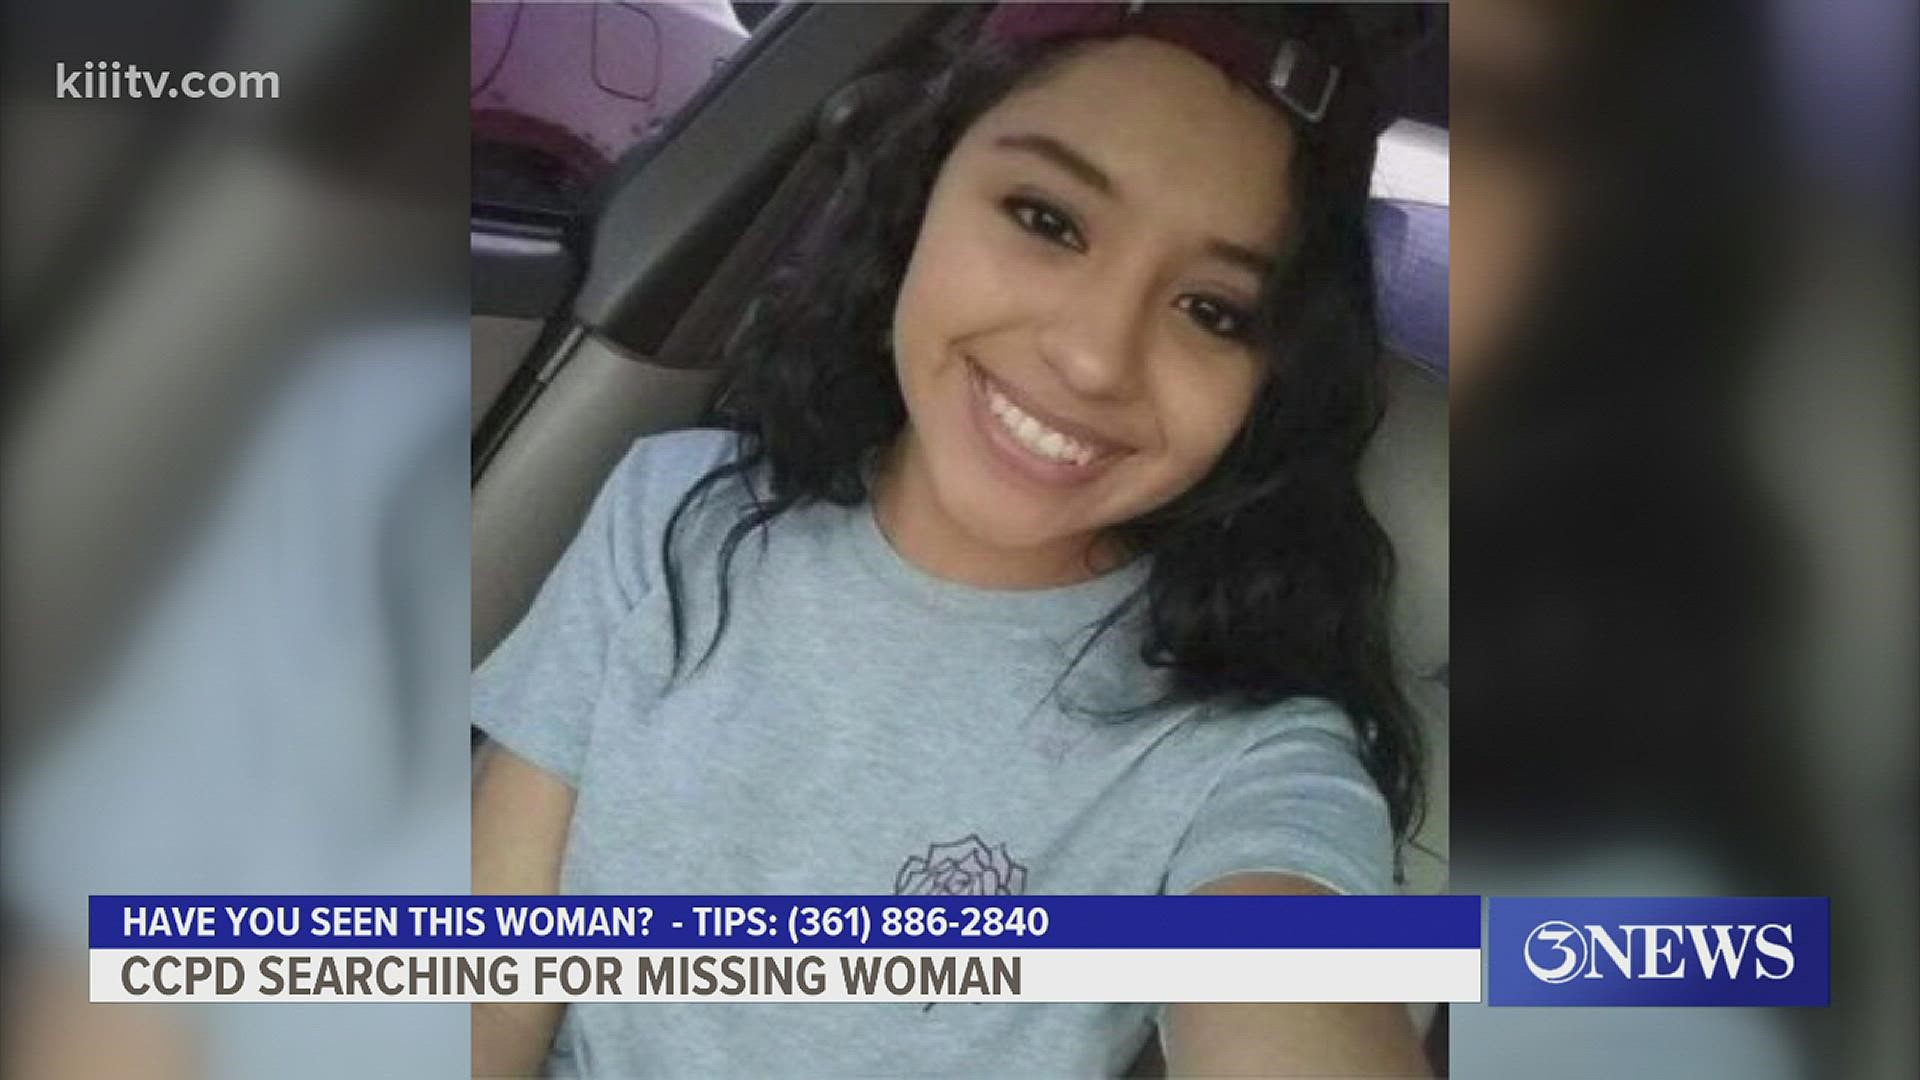 21-year-old Leticia Franco was reported missing on May 09, 2022 by family members.